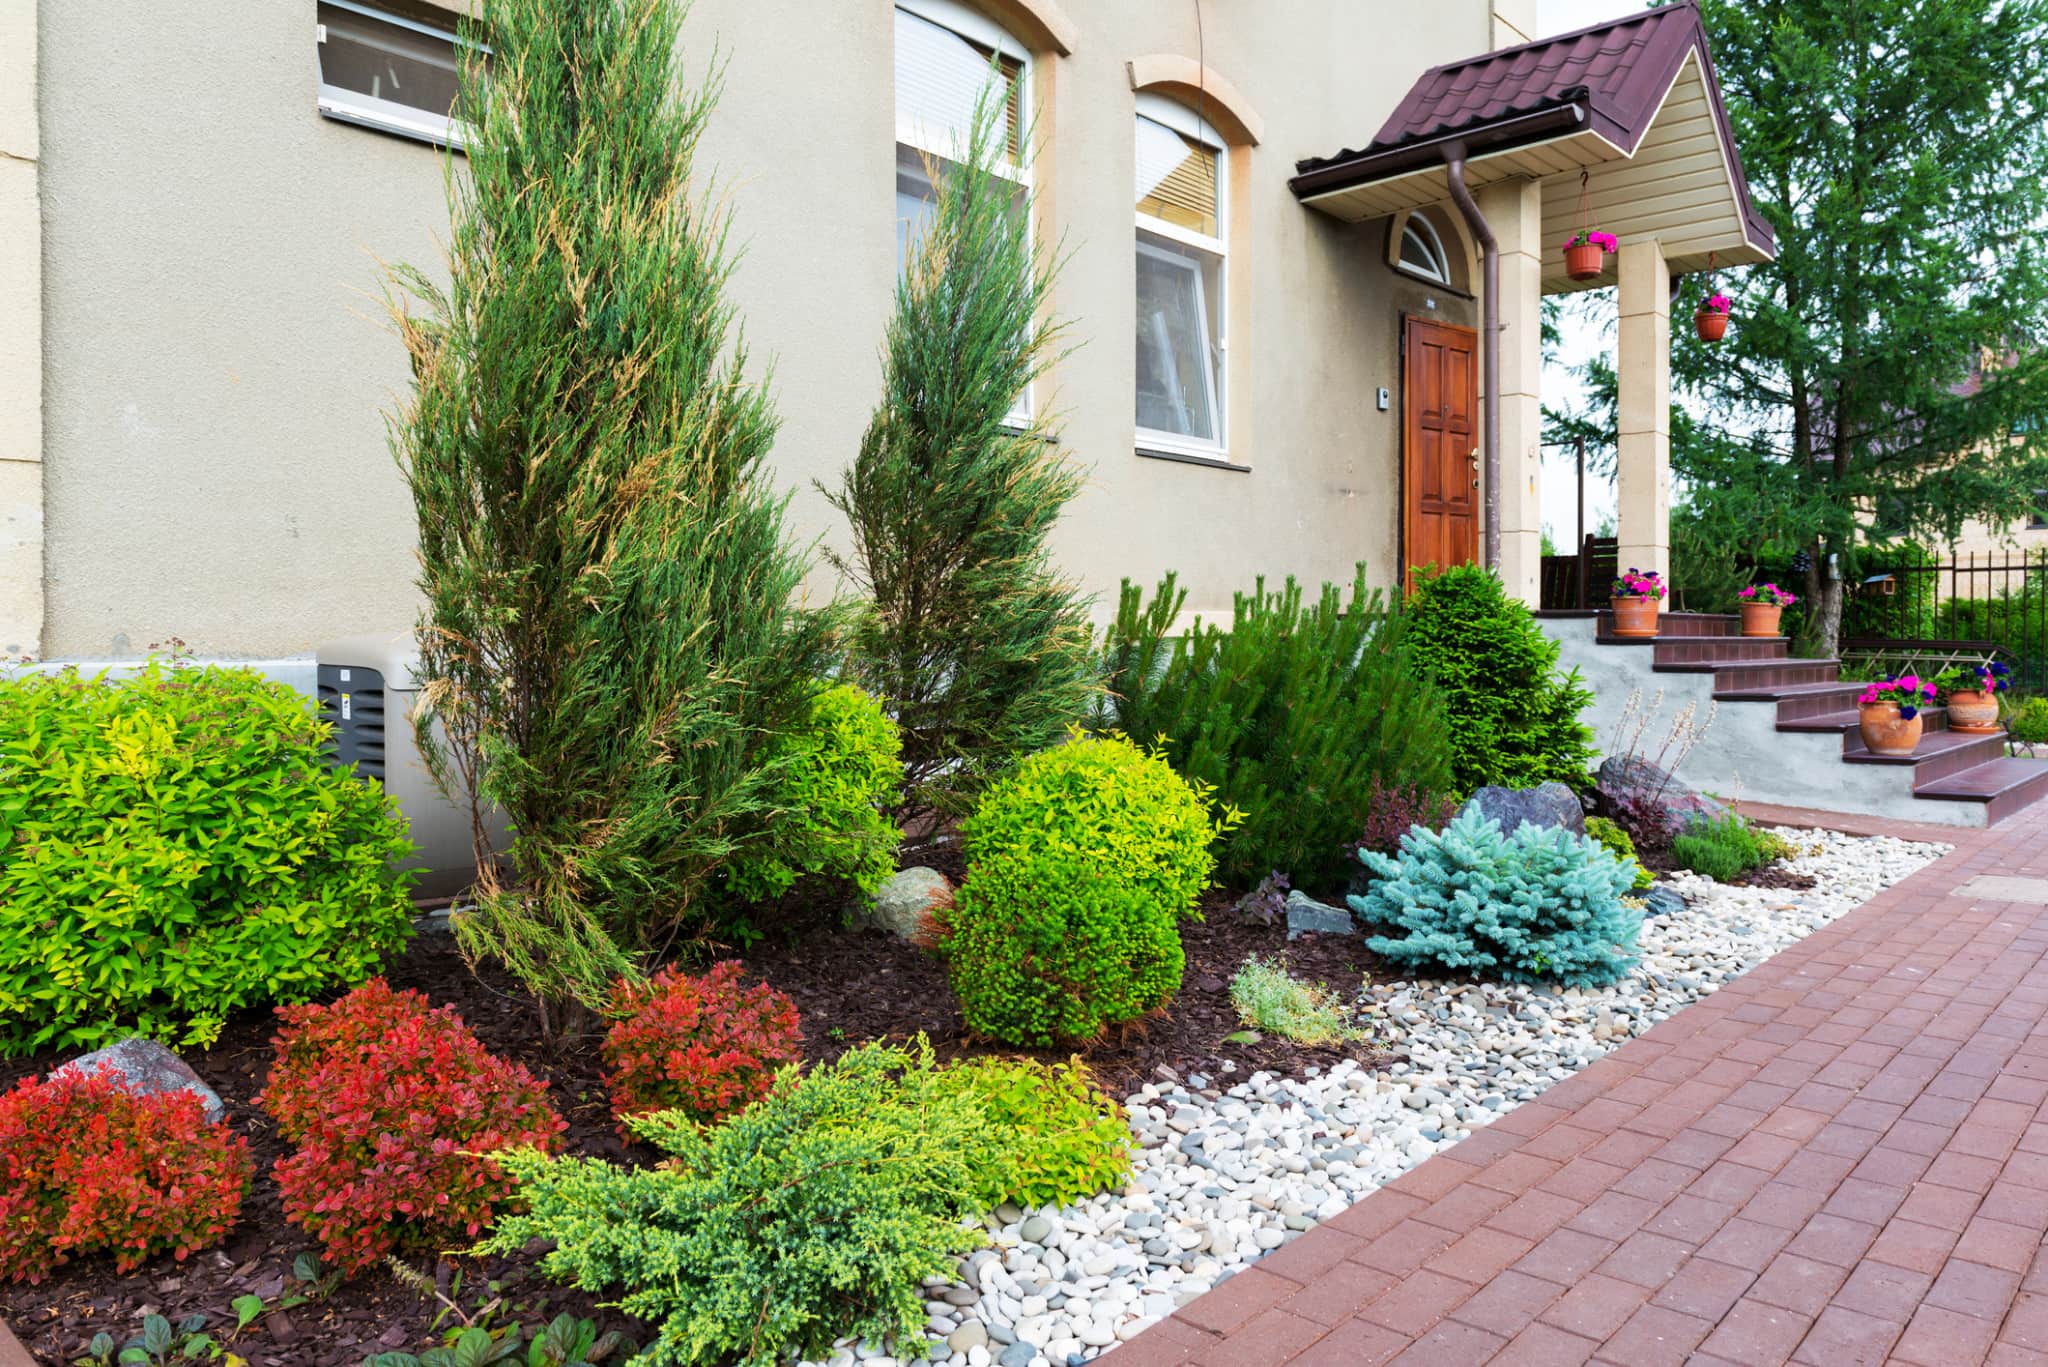 Tips for Beautiful Landscaping | A1 Sure Services